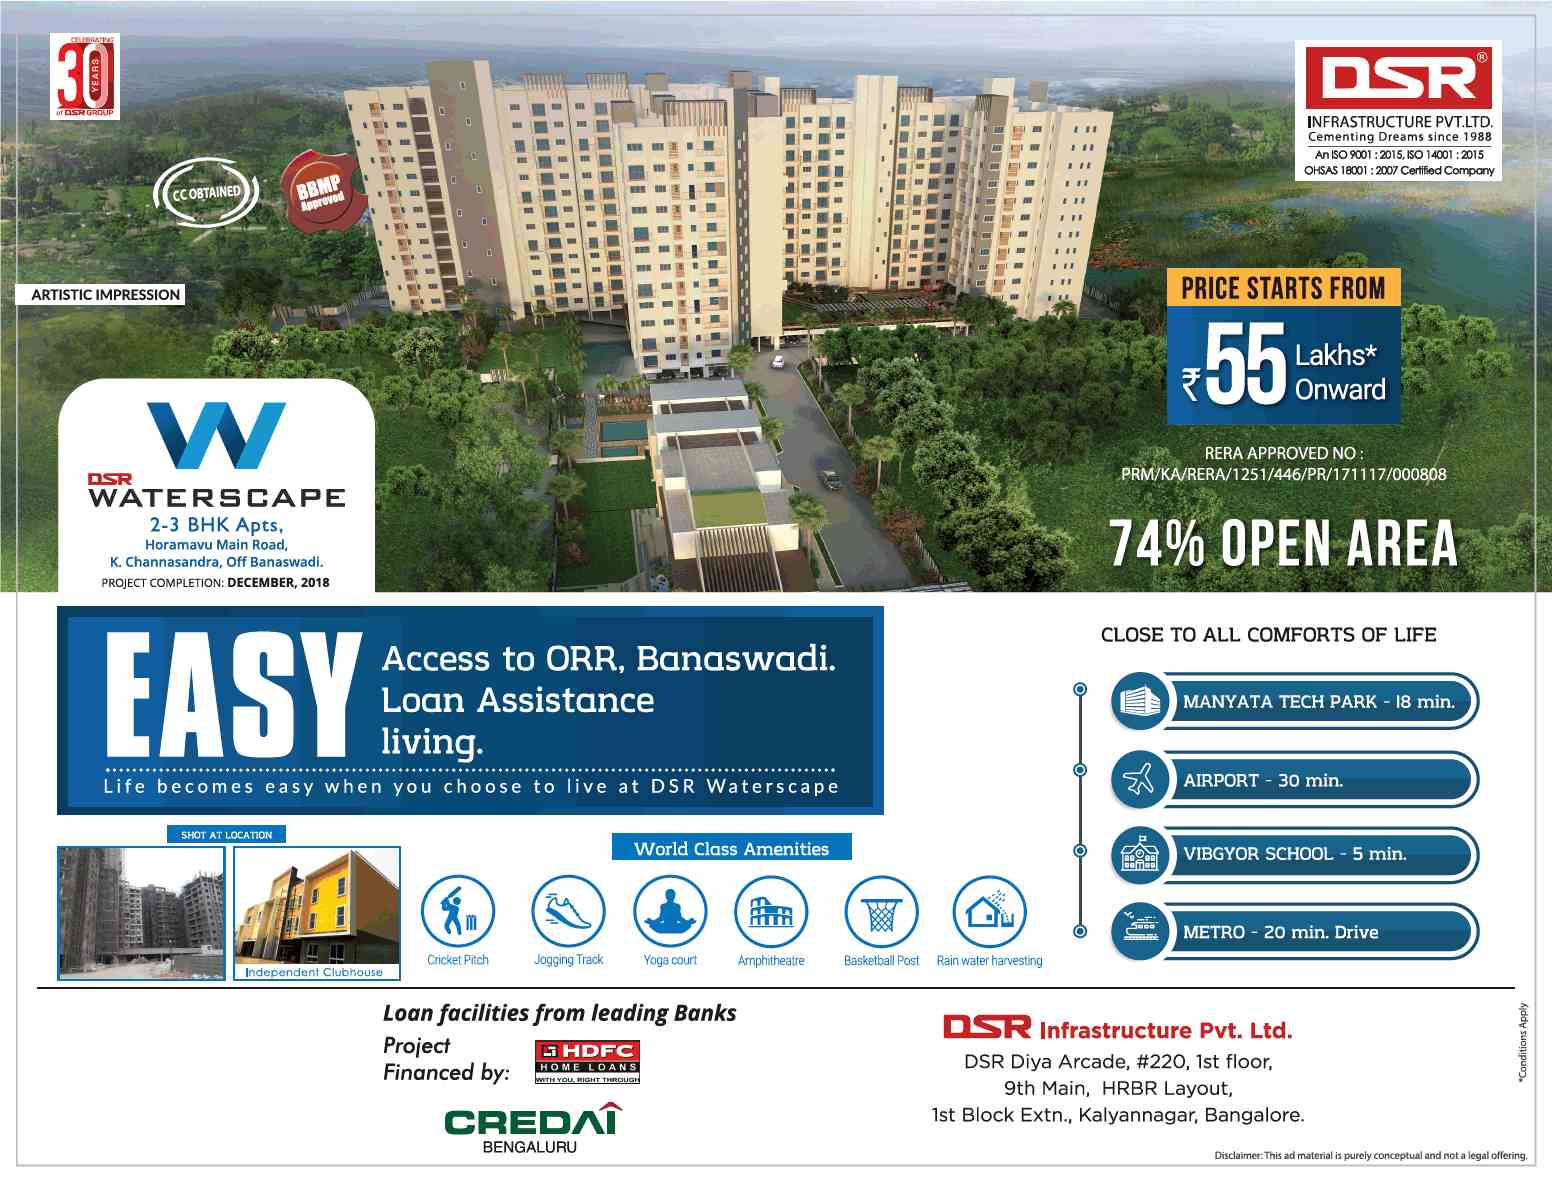 Book 2 & 3 BHK apartments @ Rs. 55 Lacs at DSR Waterscape in Bangalore Update